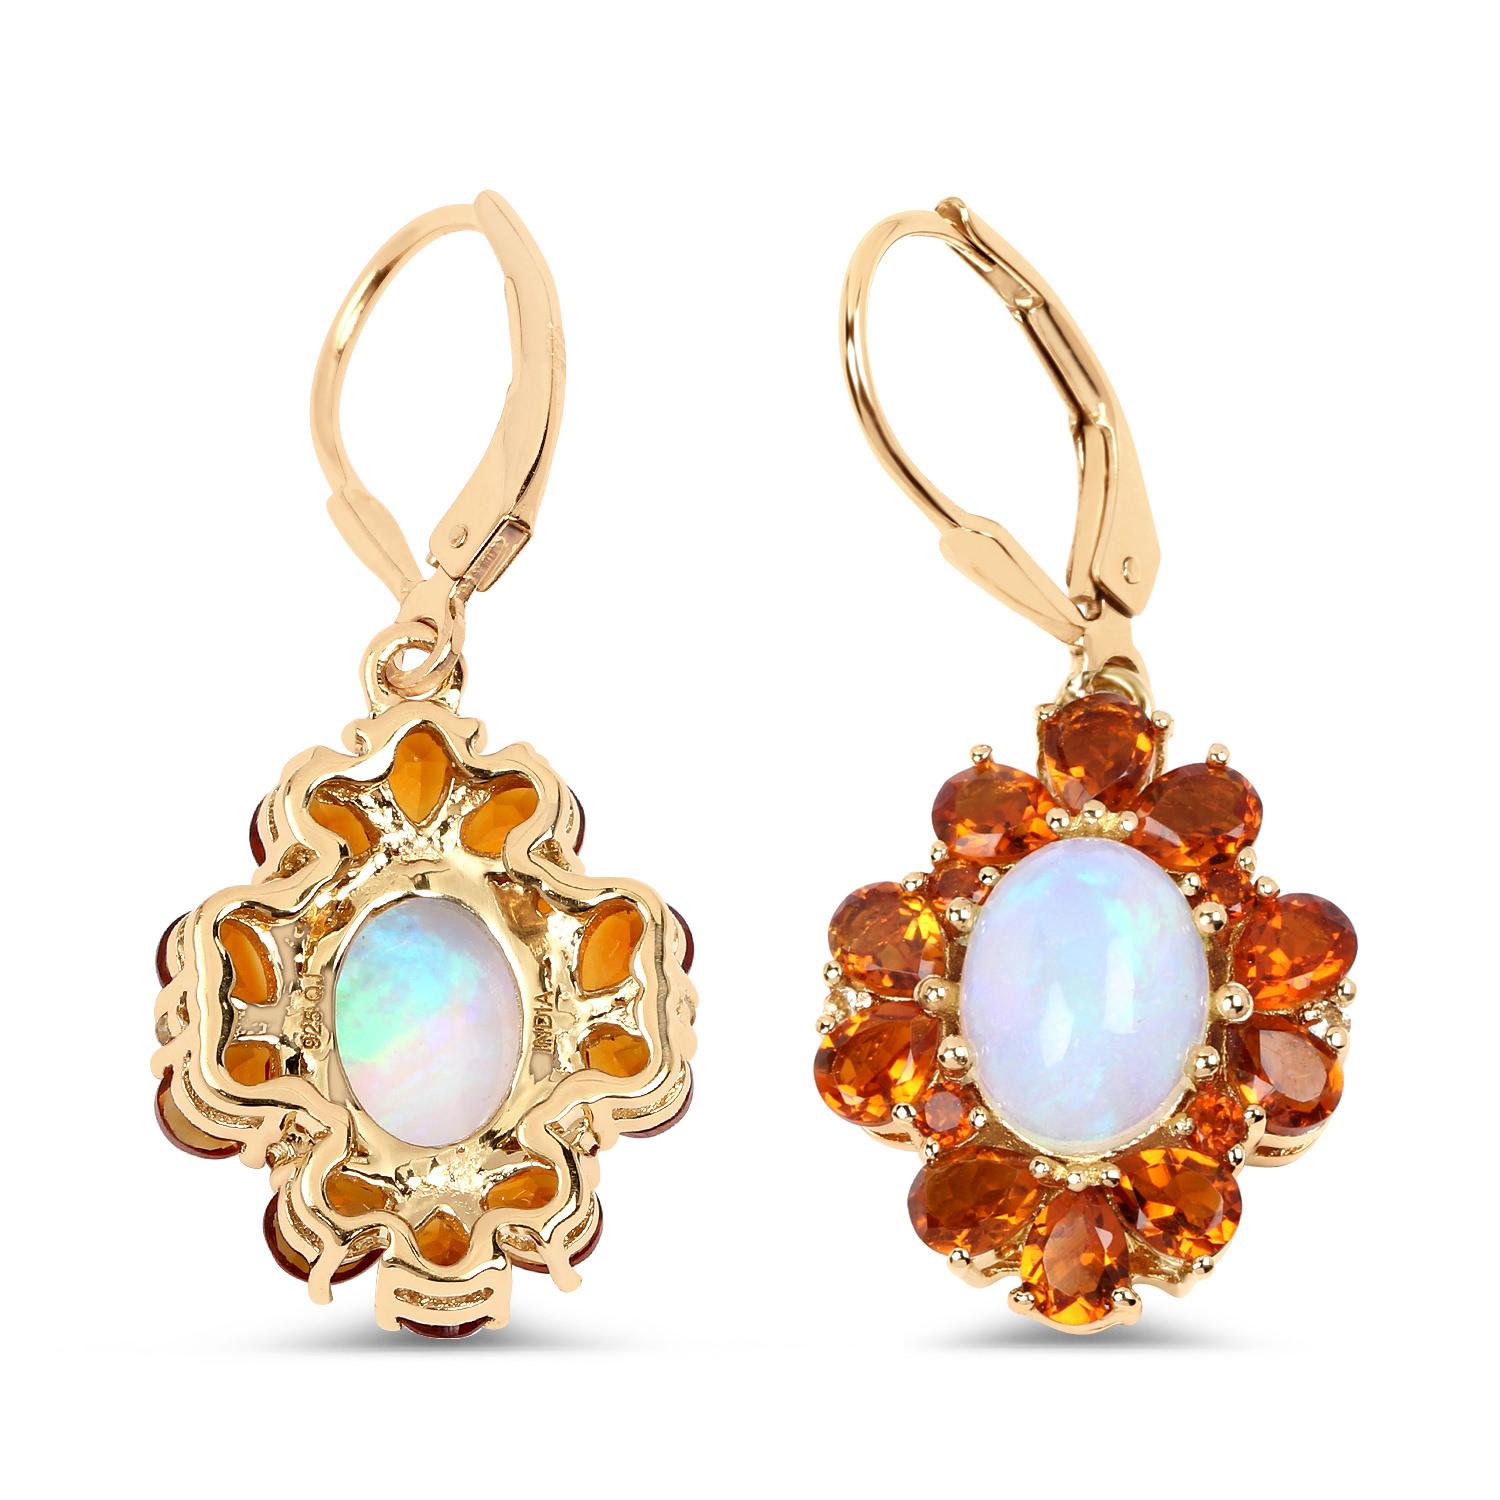 Mixed Cut Natural Ethiopian Opal & Citrine Dangle Earrings 14k Gold Plated Silver For Sale